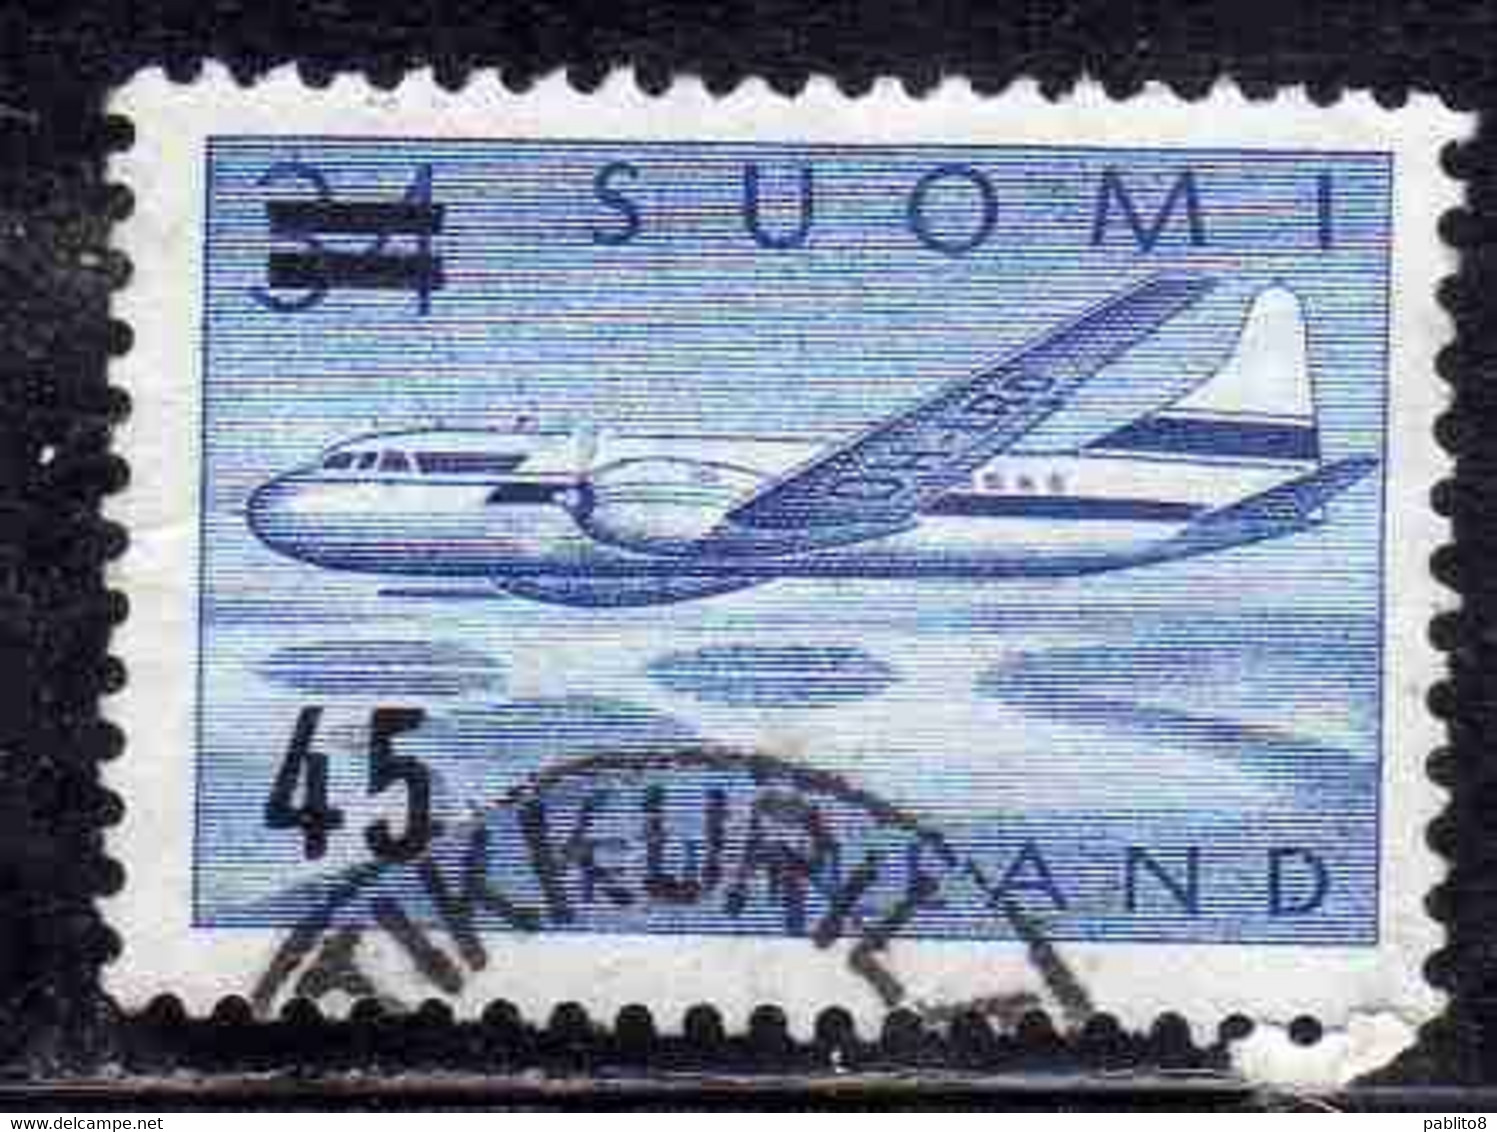 SUOMI FINLAND FINLANDIA FINLANDE 1959 SURCHARGED AIR POST MAIL AIRMAIL CONVAIR OVER LAKES 45 On 34m USED USATO OBLITERE' - Gebraucht